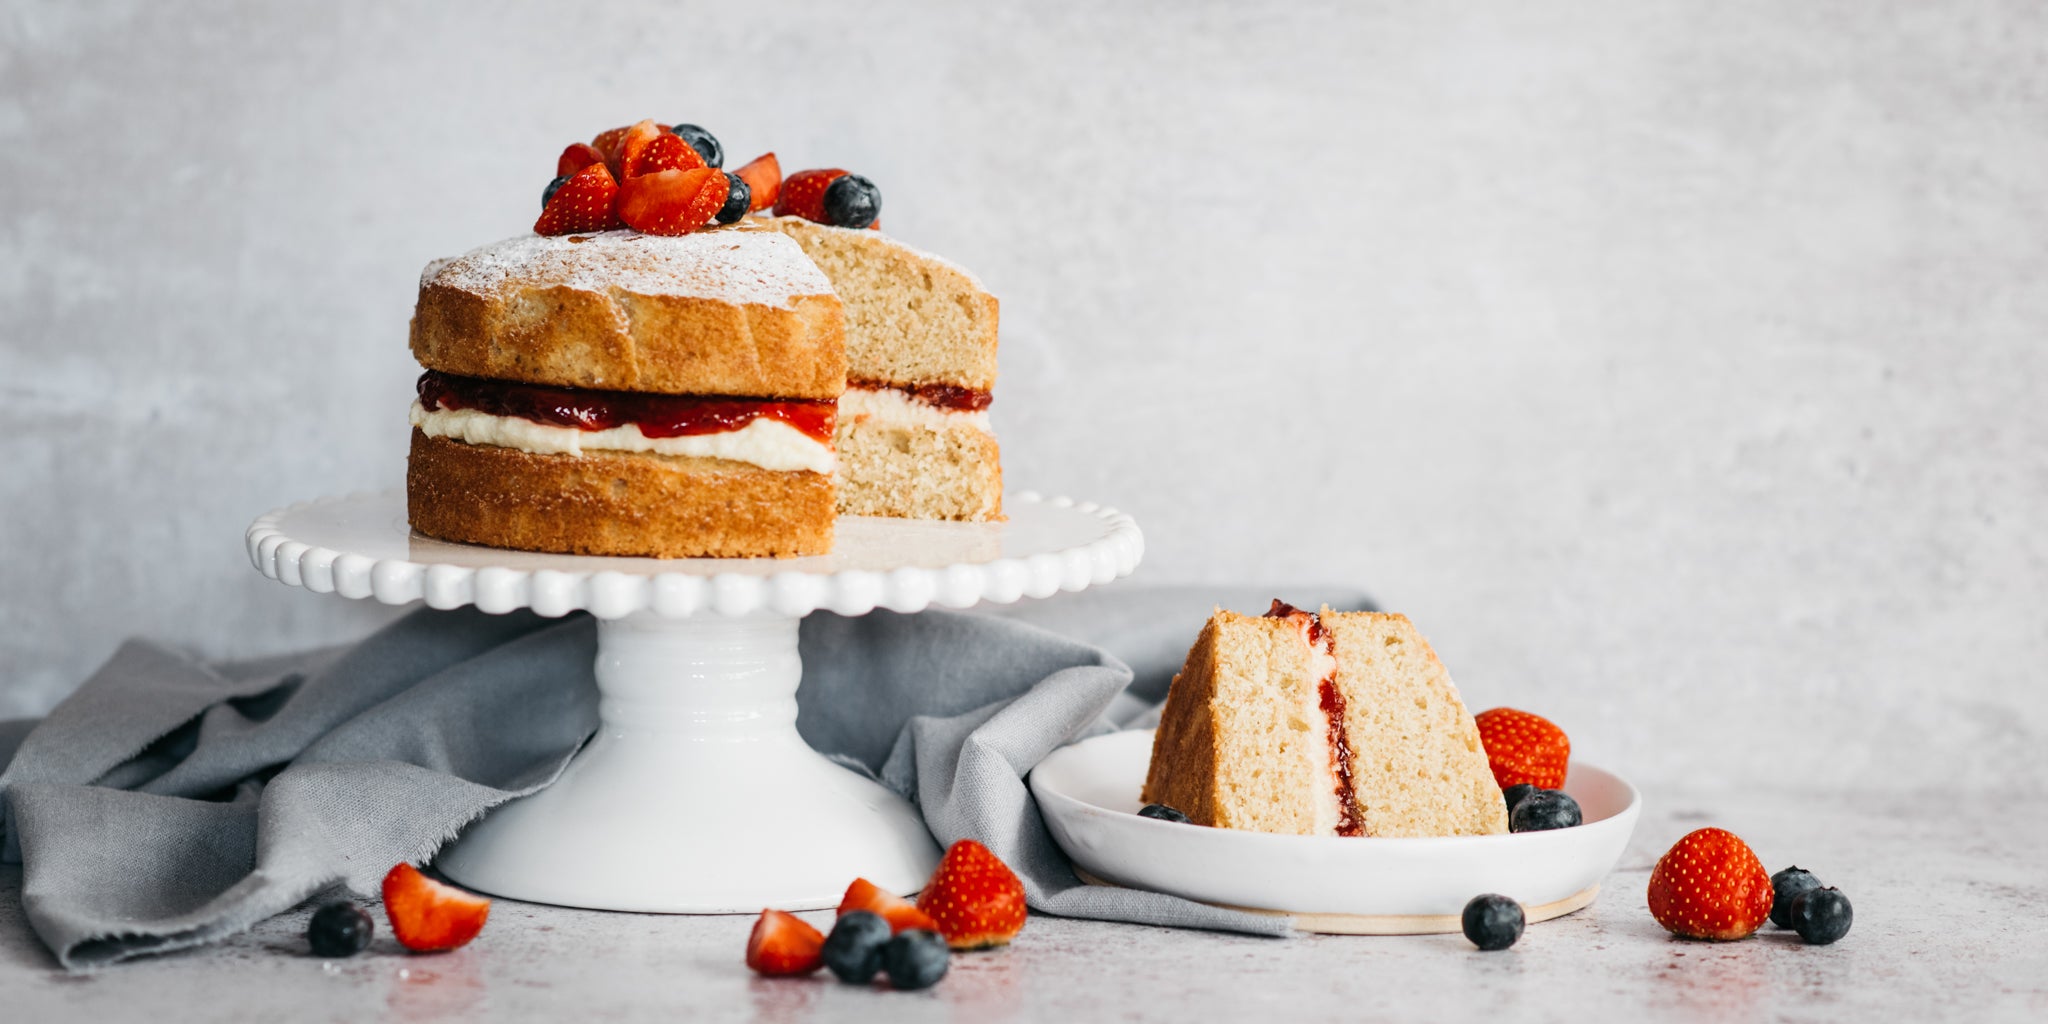 Wholemeal Victoria Sponge on a cake stand, with a slice cut out of it served on a plate and garnished with fresh summer berries